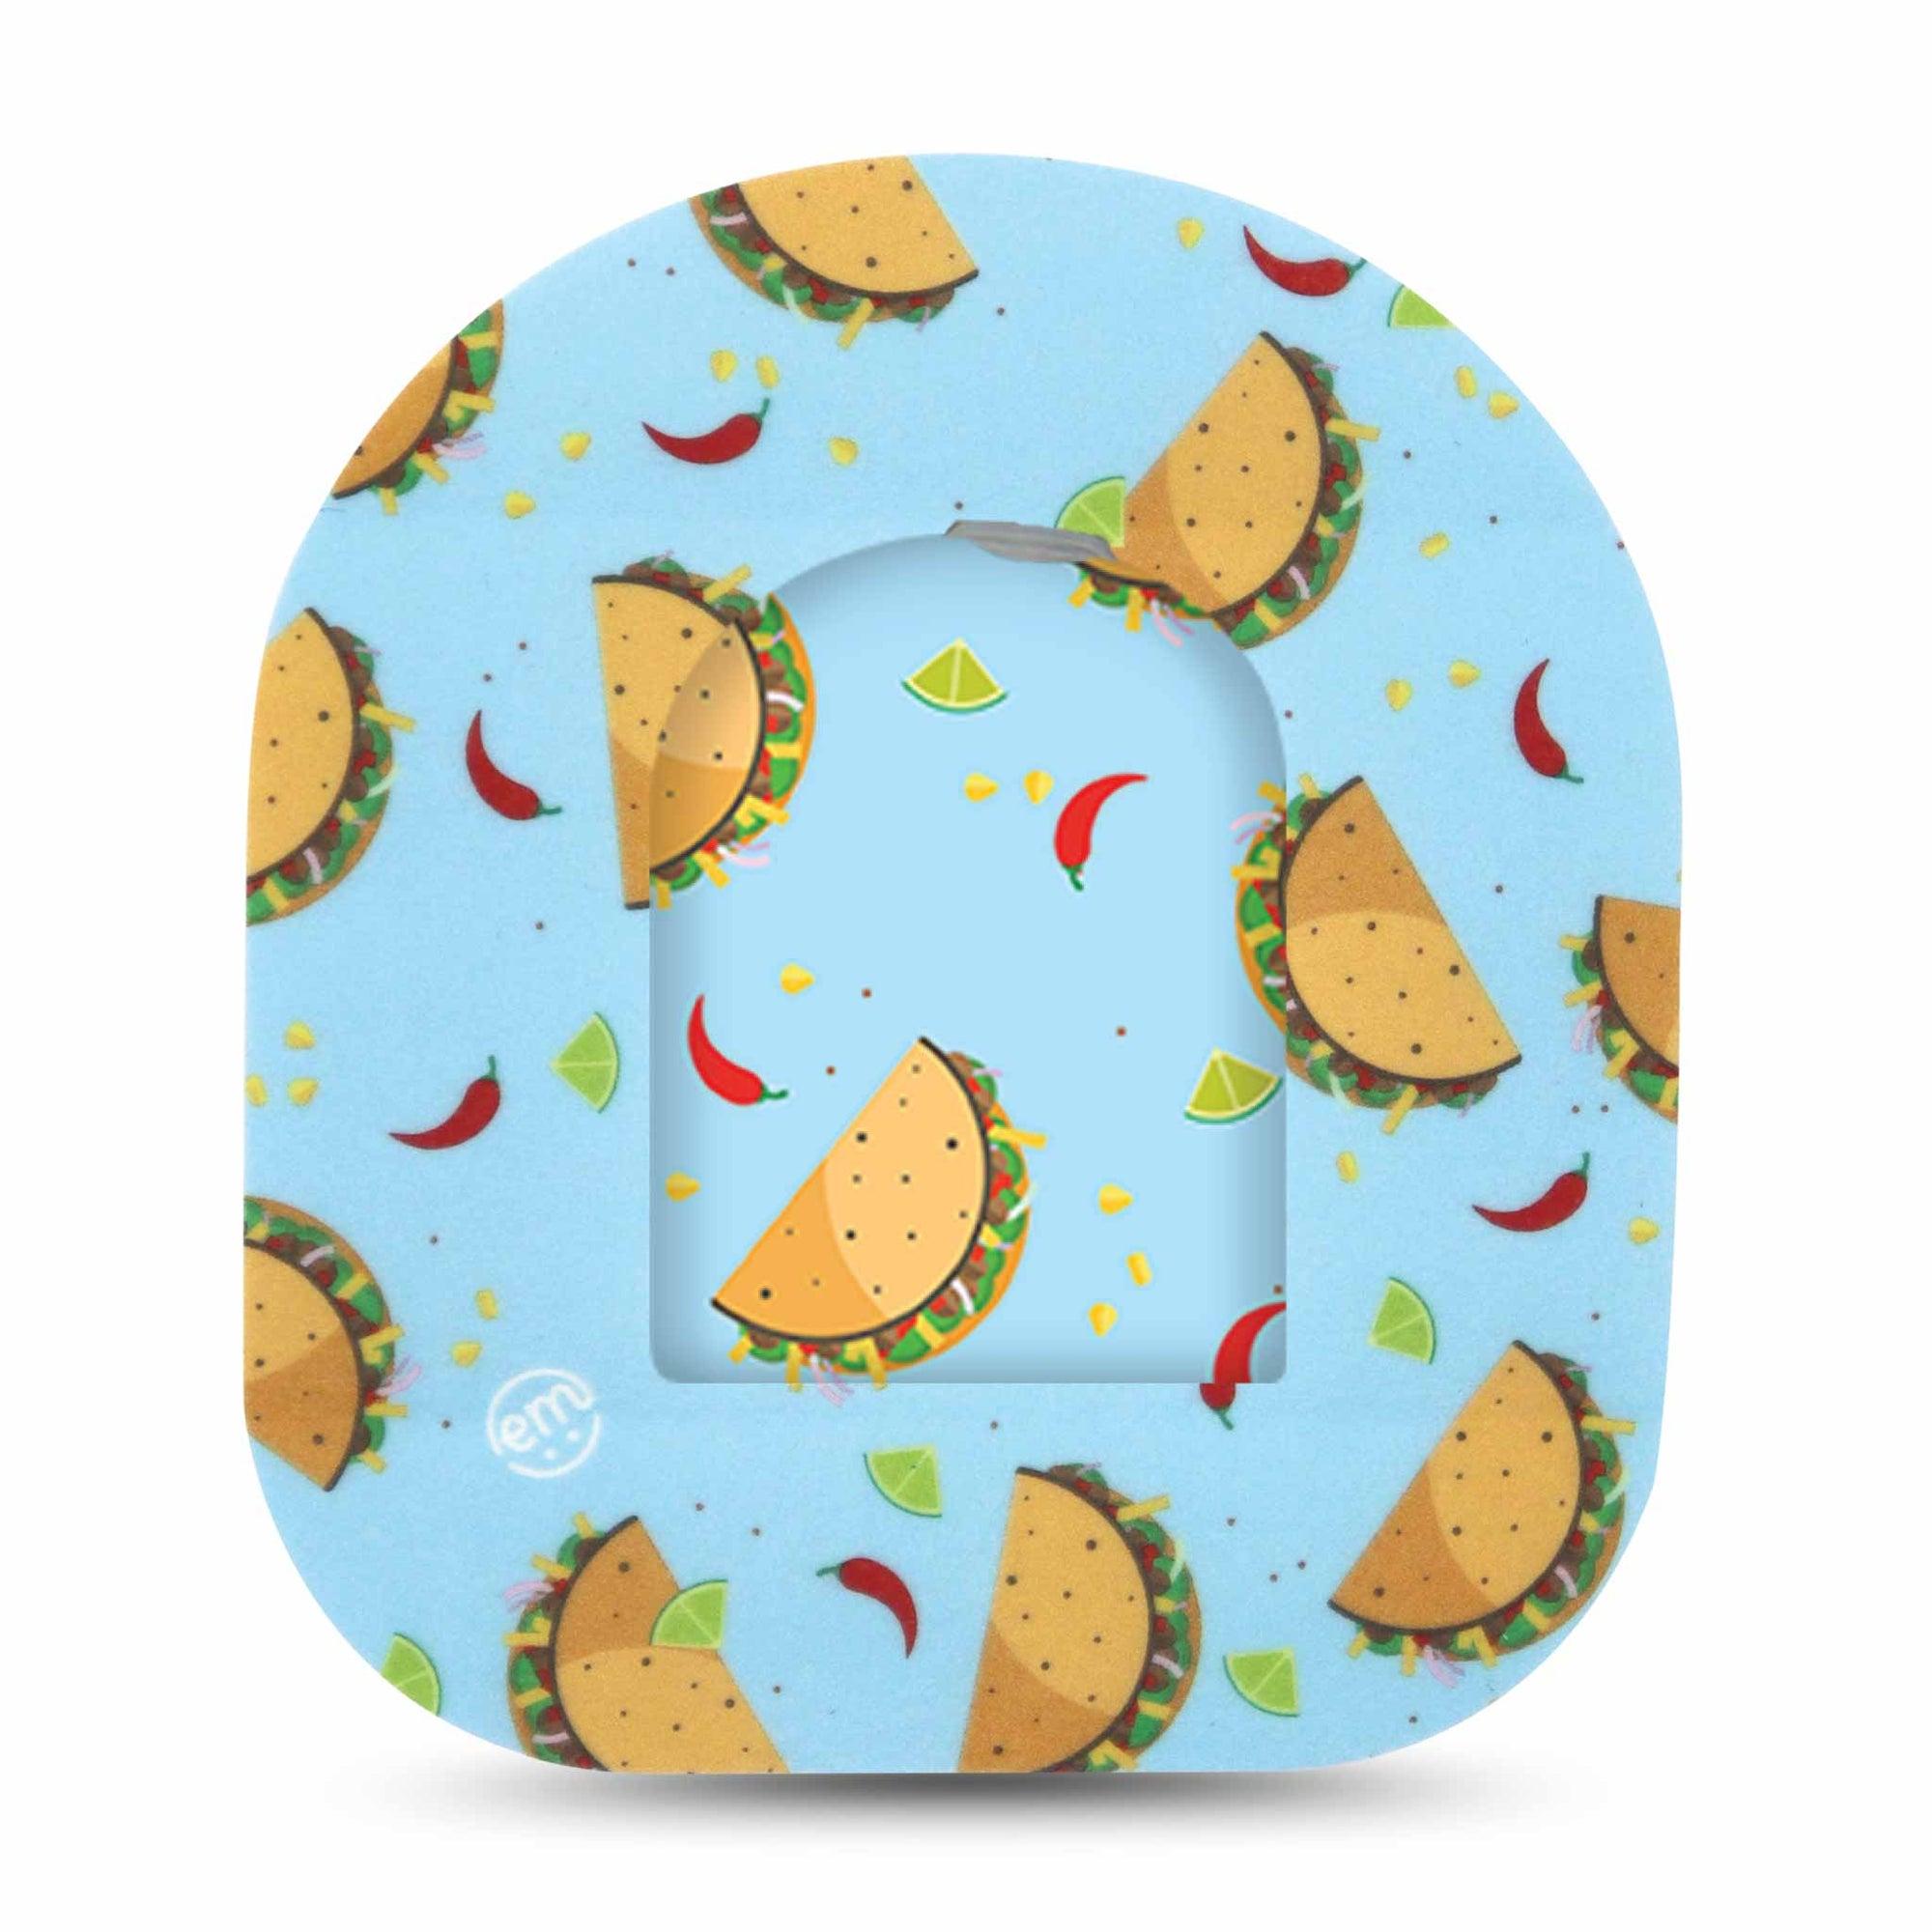 ExpressionMed Spicy Tacos Omnipod Full Wrap Center Sticker and Mini Tape Taco and Hot Jalapenos Print Vinyl Sticker and Tape Design Pump Design